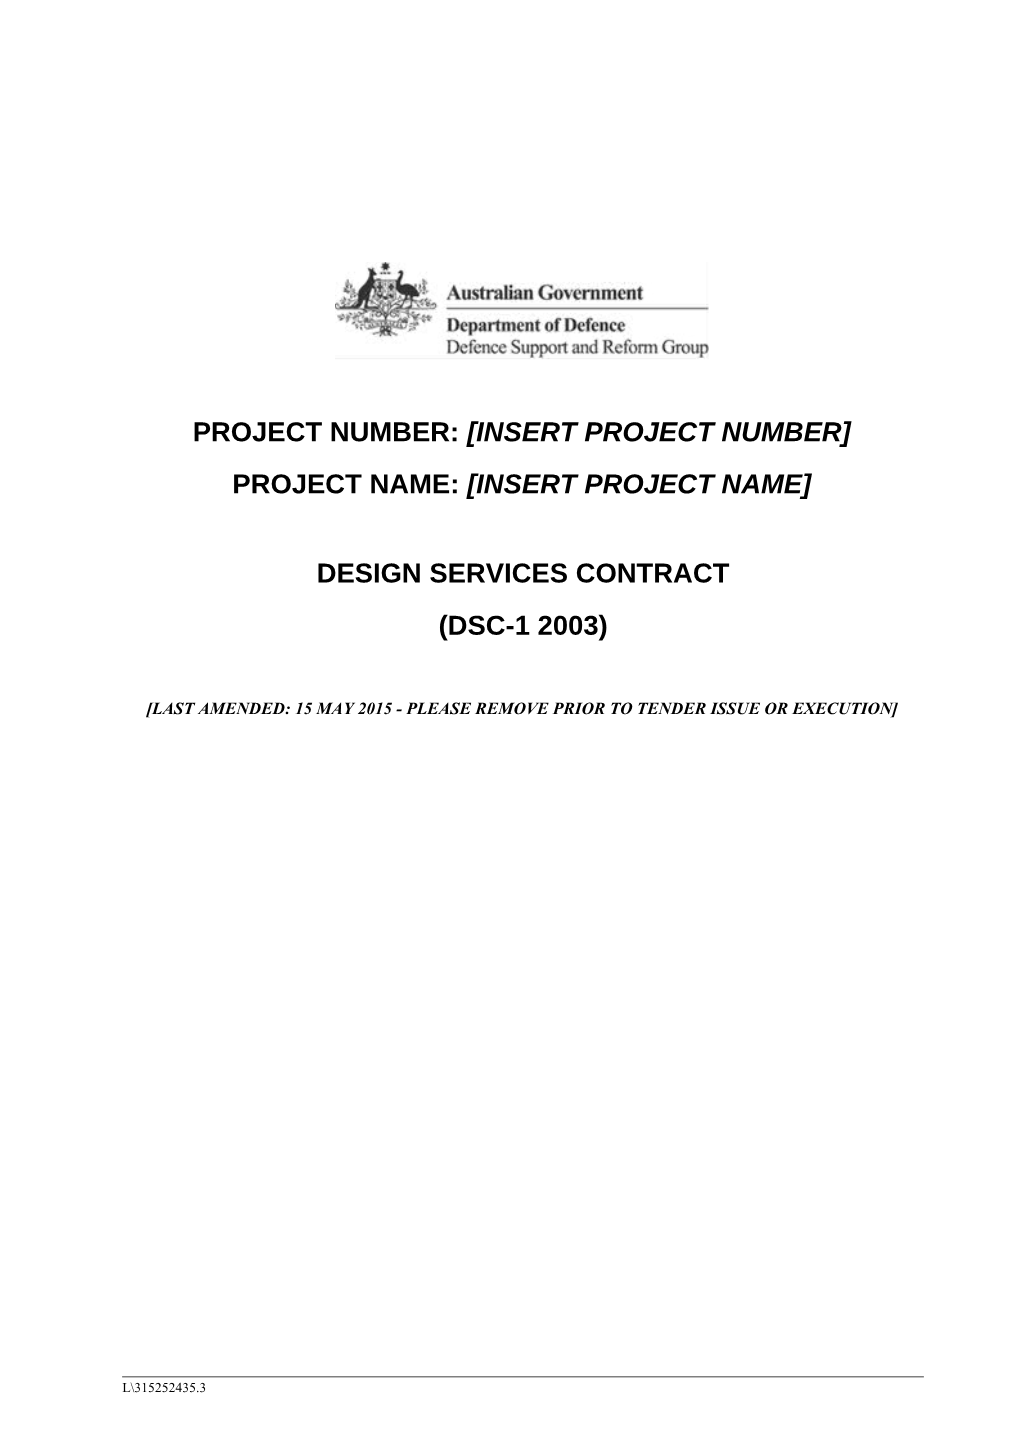 Project Number: Insert Project Number